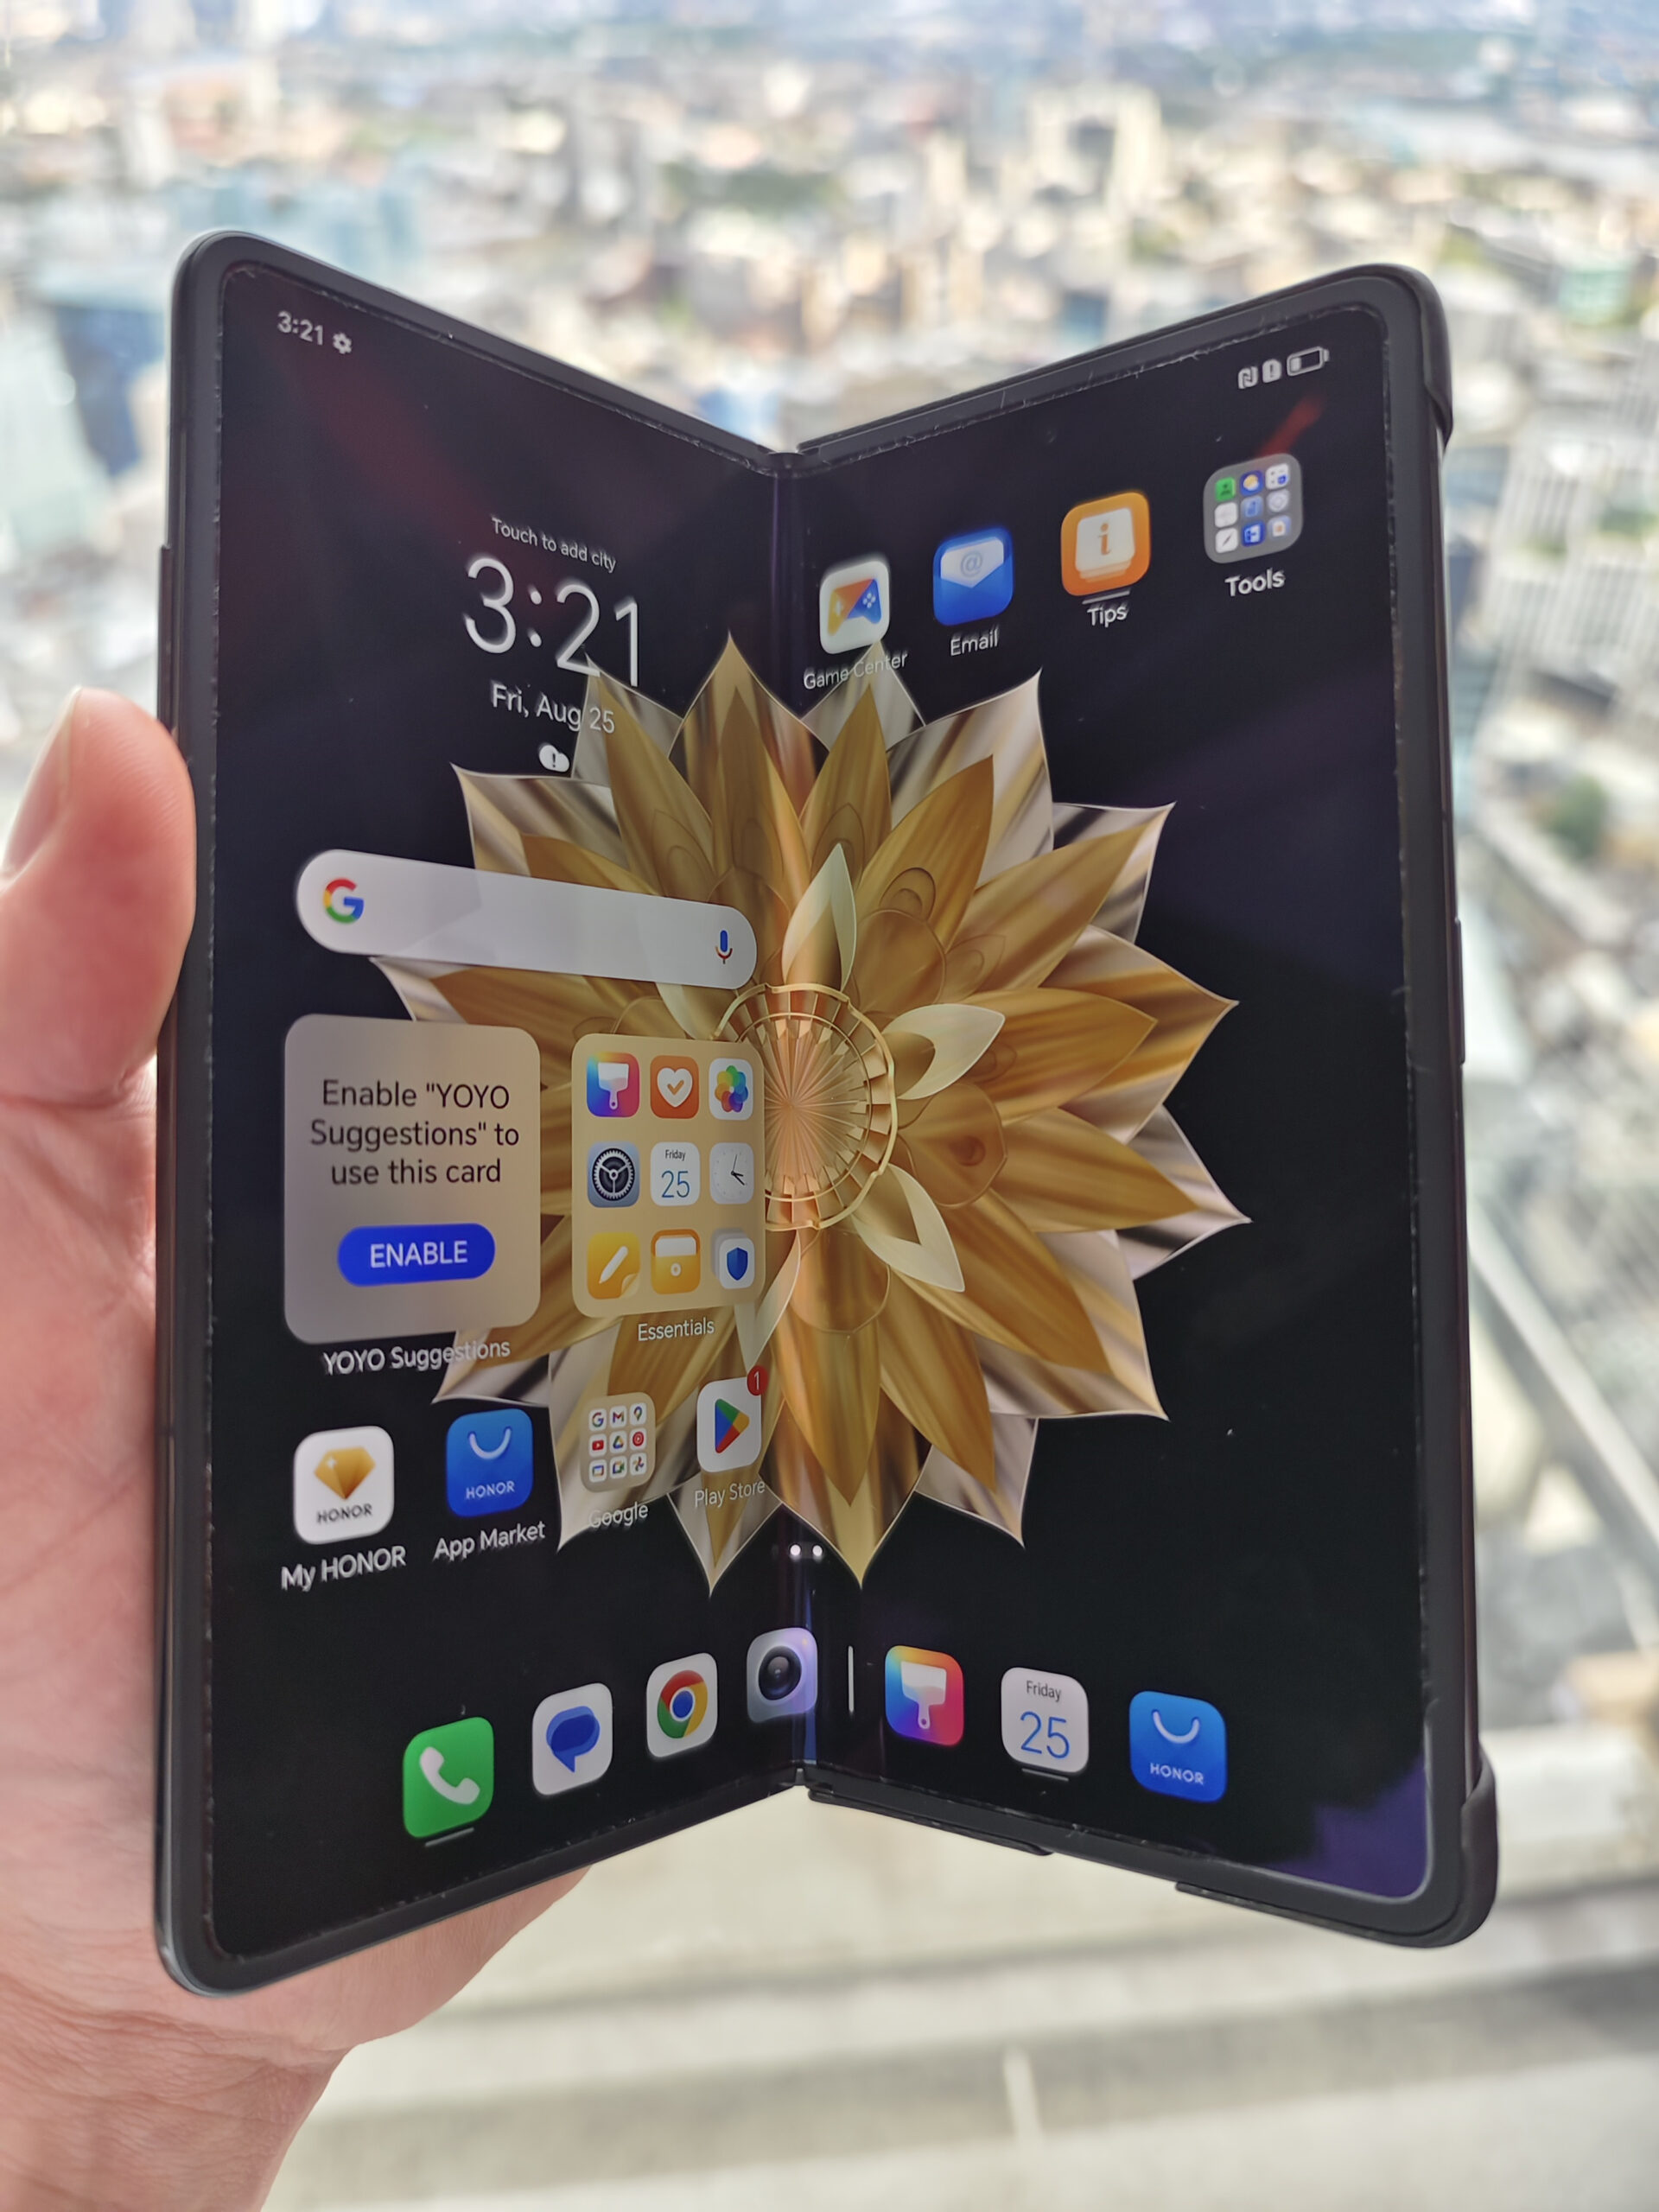 Honor Magic V Purse - a concept foldable smartphone that can be